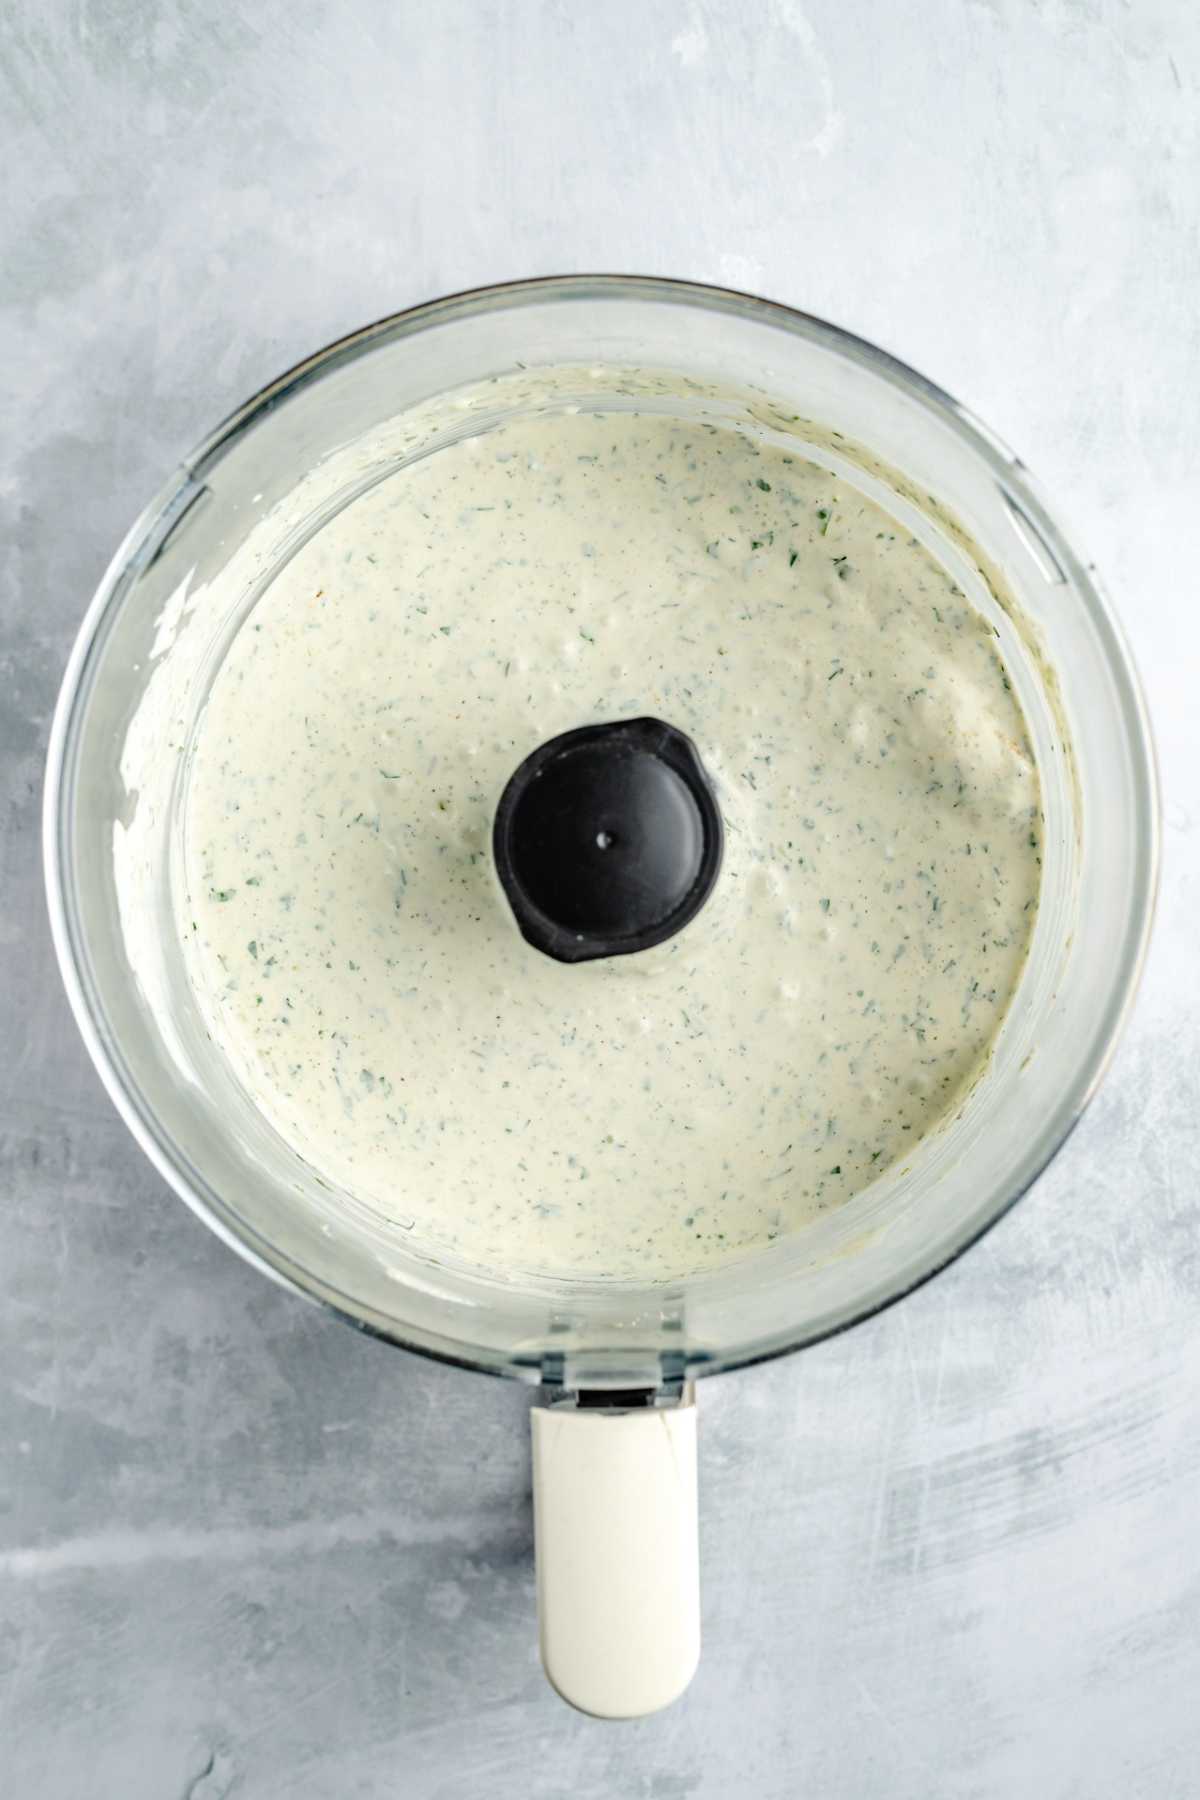 Blended cream cheese dip in a food processor.